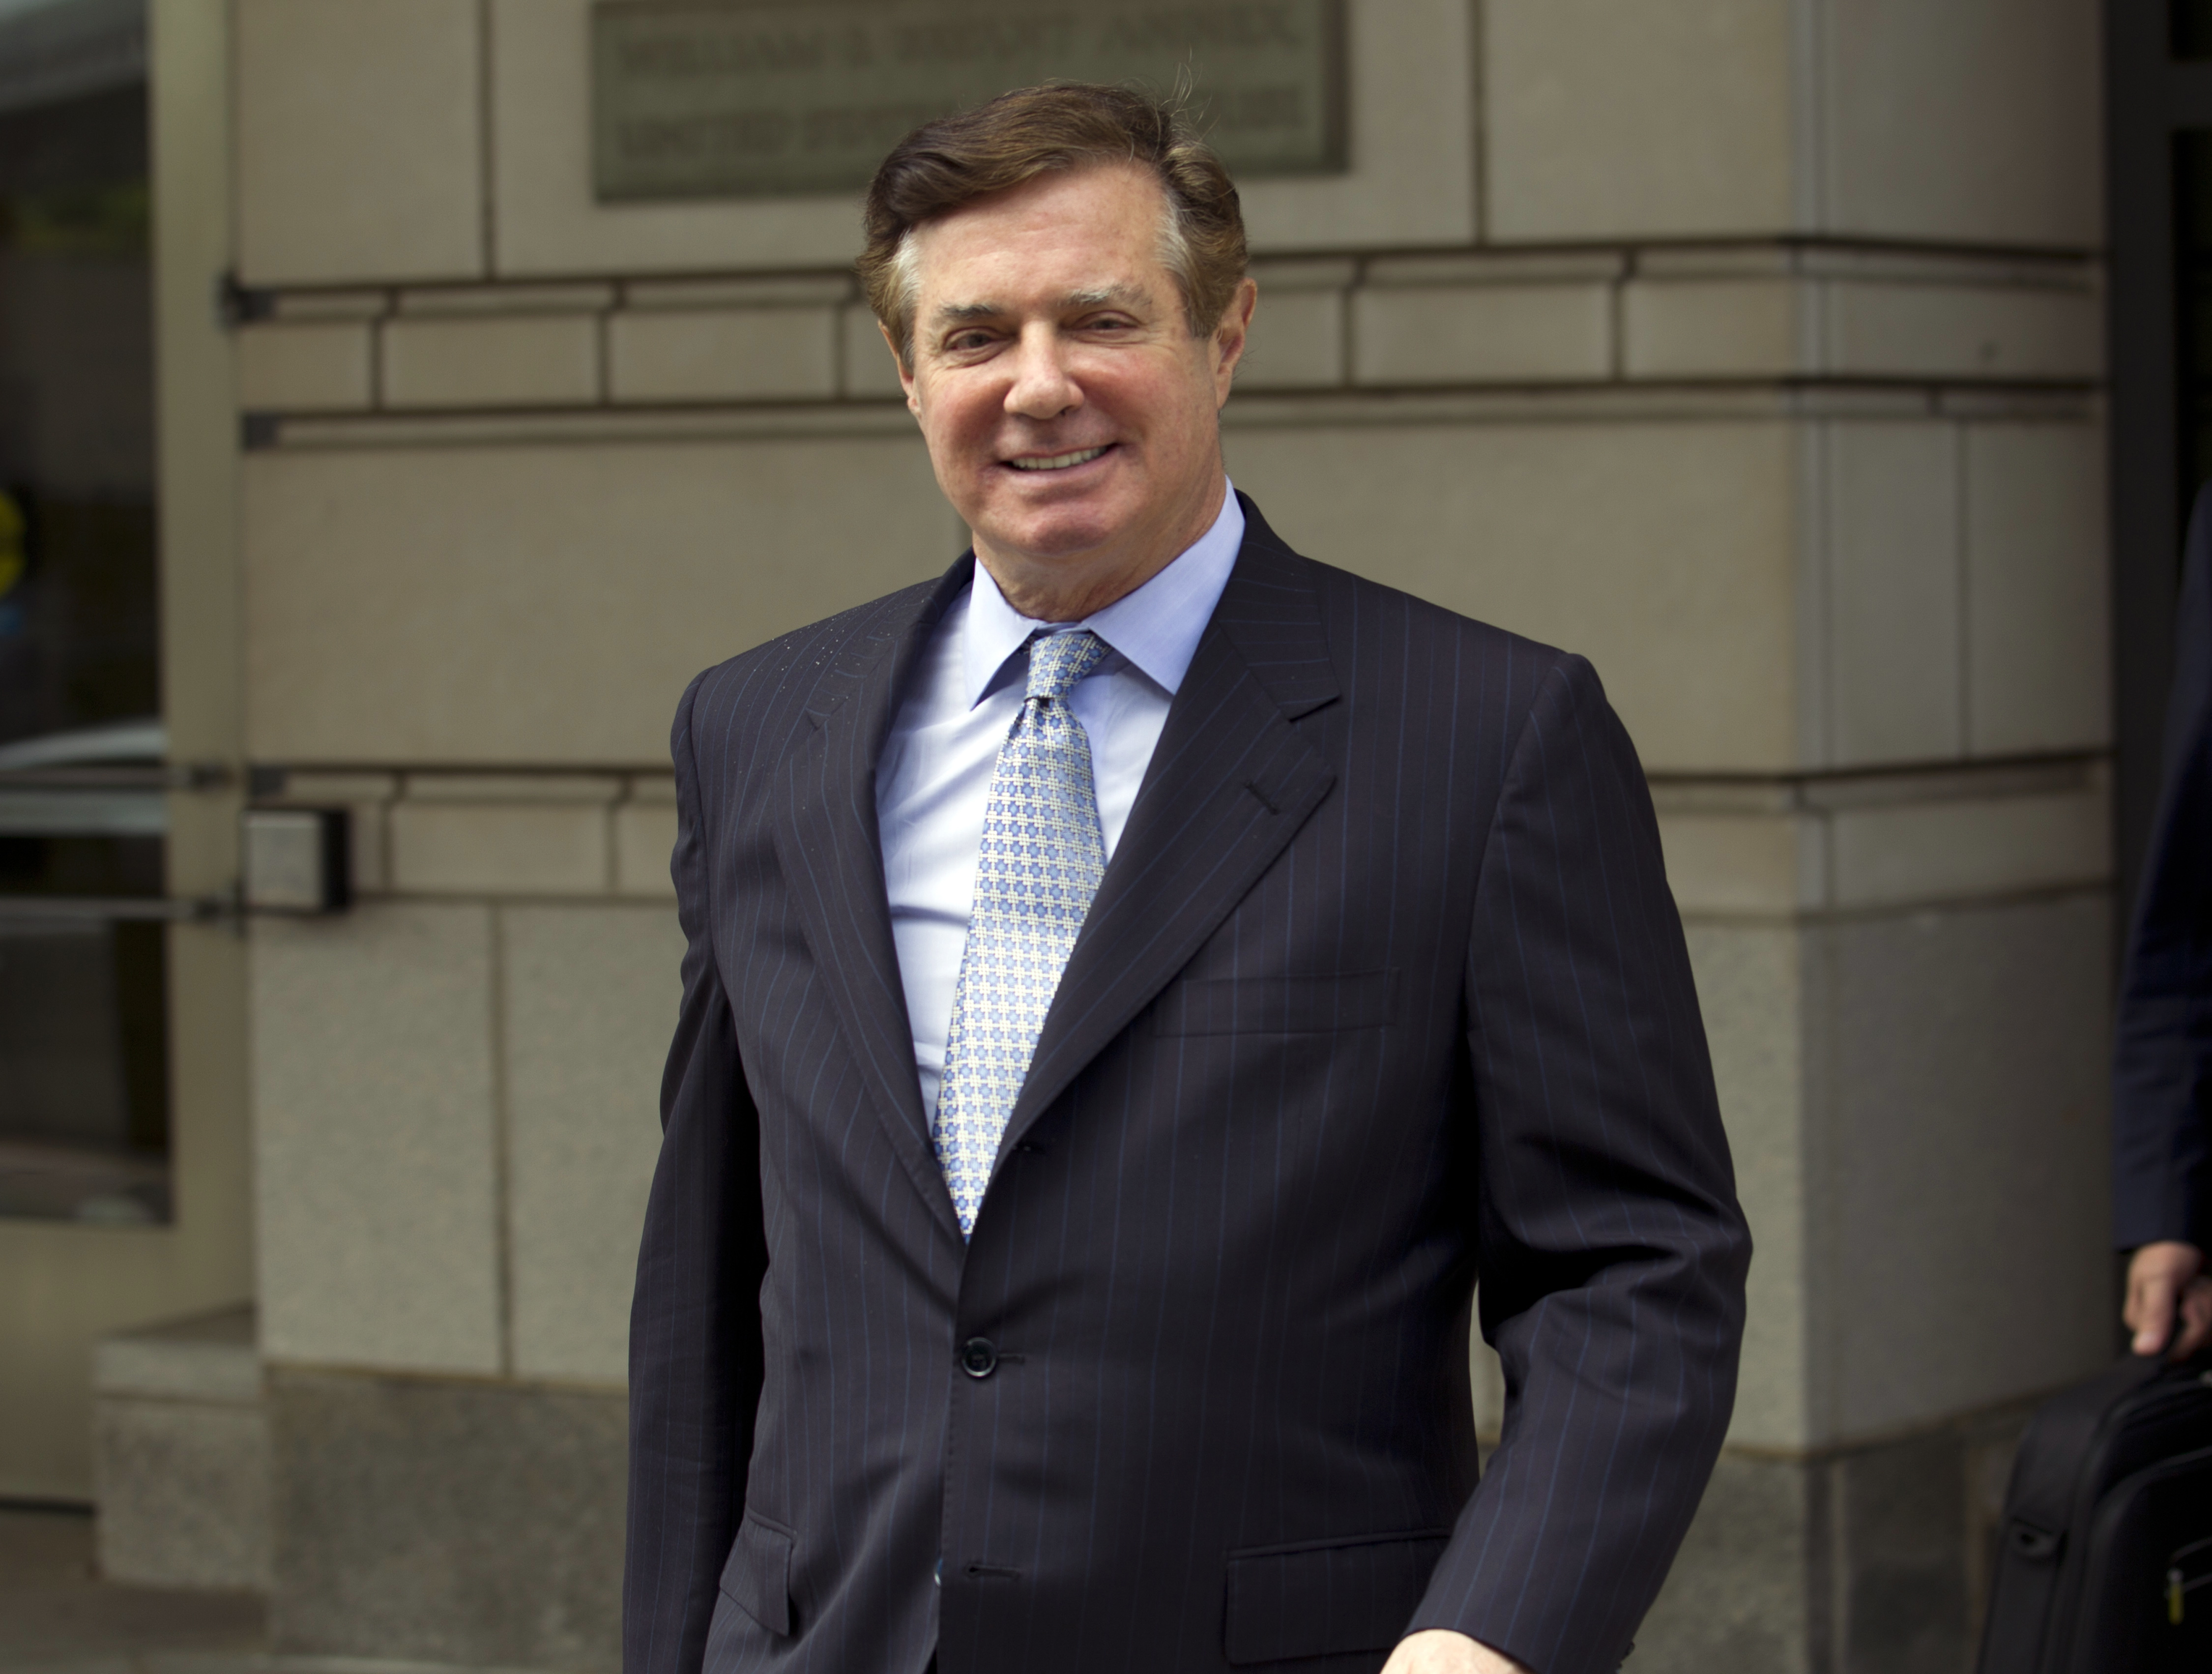 Manafort accused of sharing 2016 election data with Russians